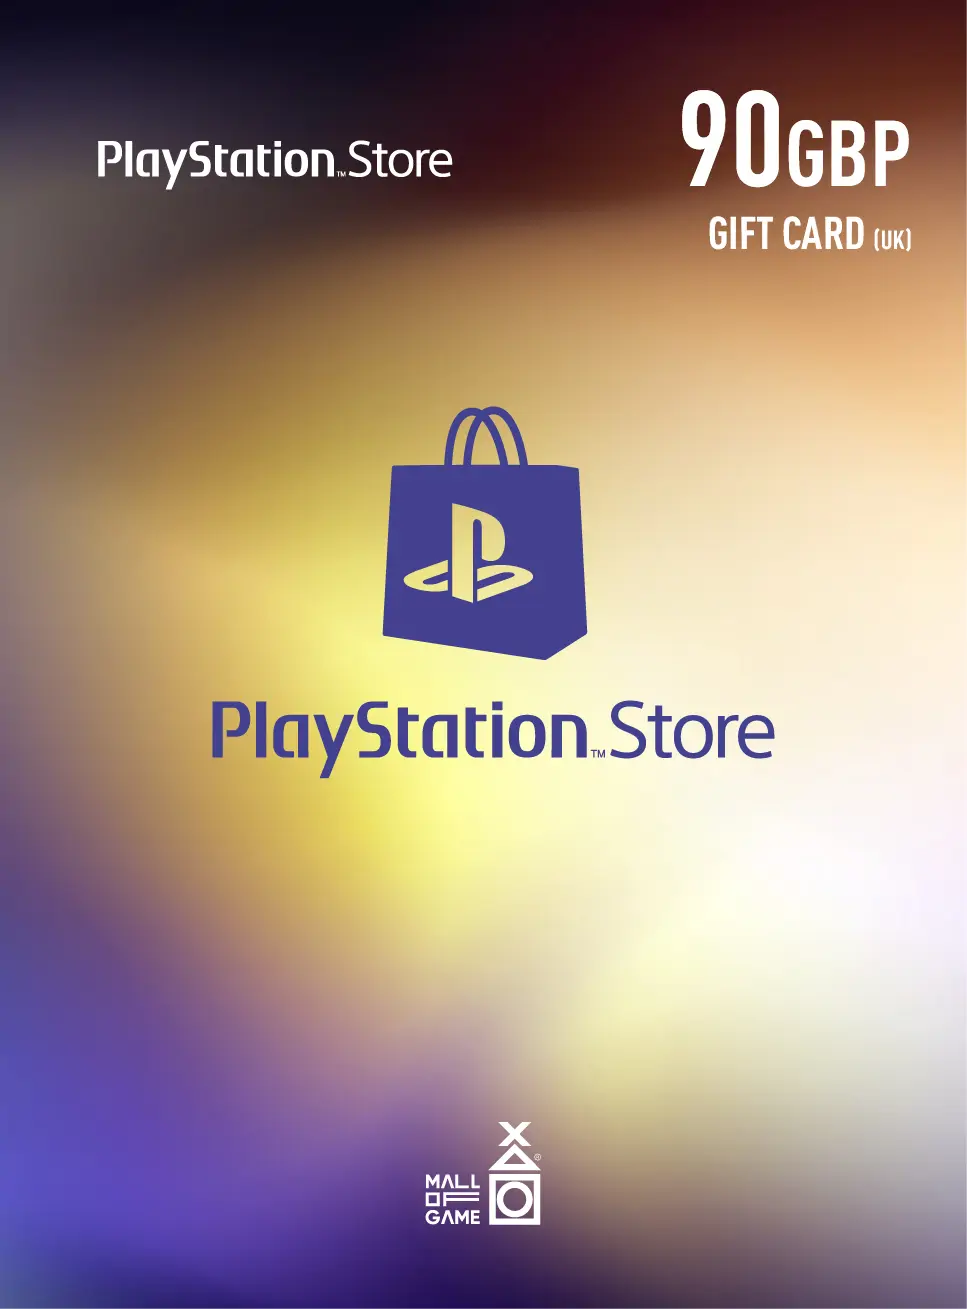 PlayStation™Store GBP90 Gift Cards (UK)